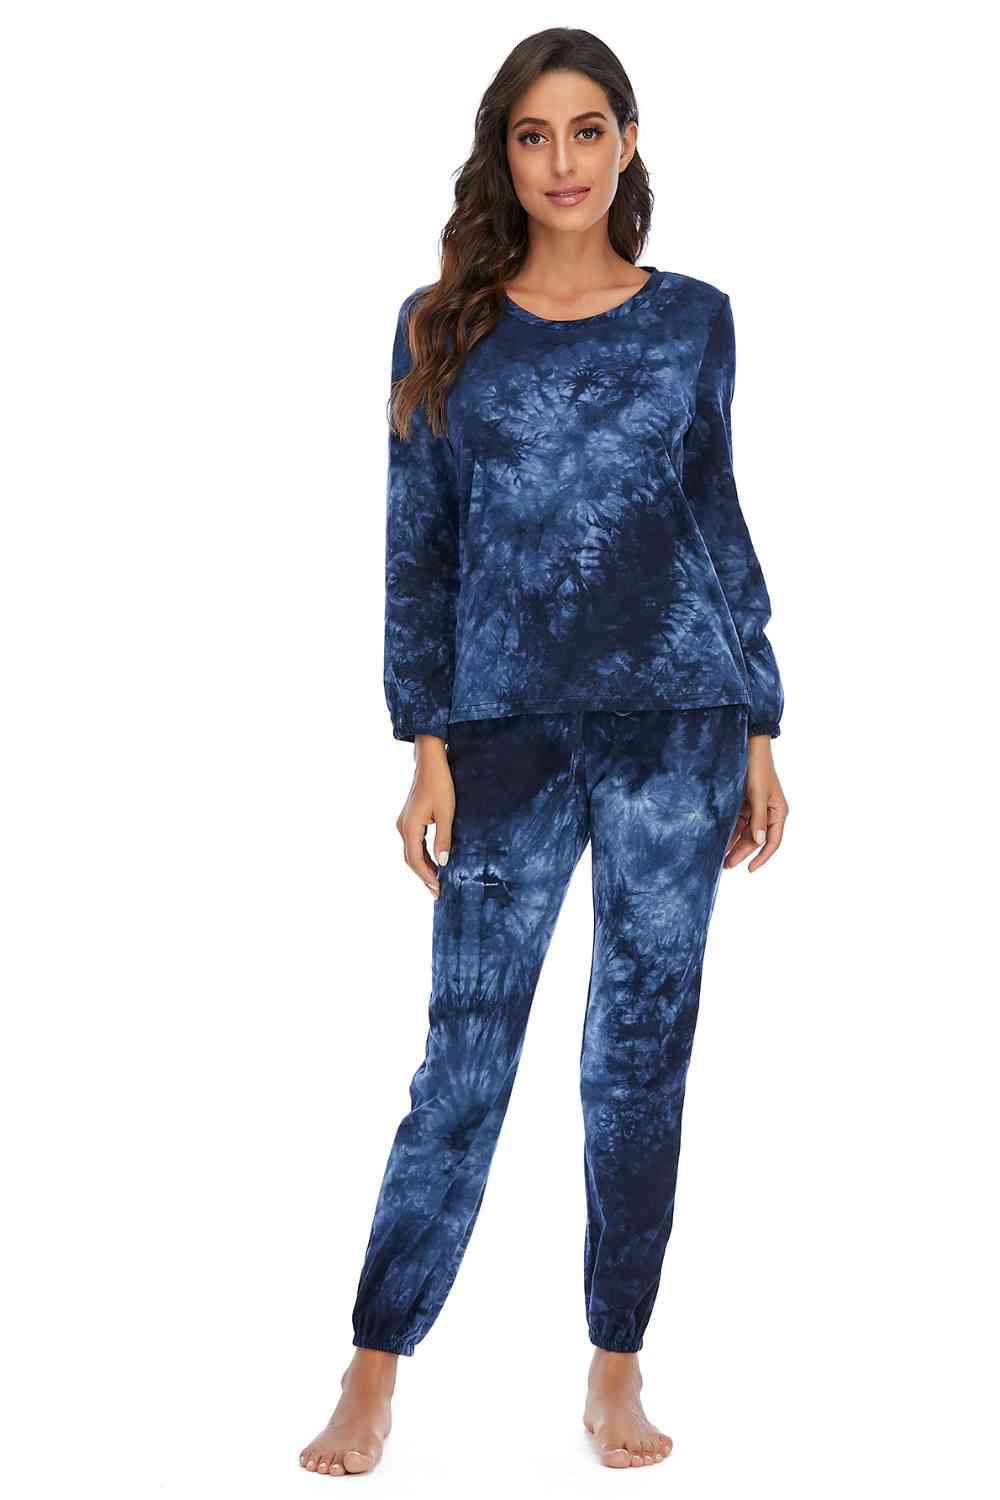 Tie-Dye Top and Drawstring Pants Lounge Set (3 Colors) Loungewear Krazy Heart Designs Boutique Navy S 